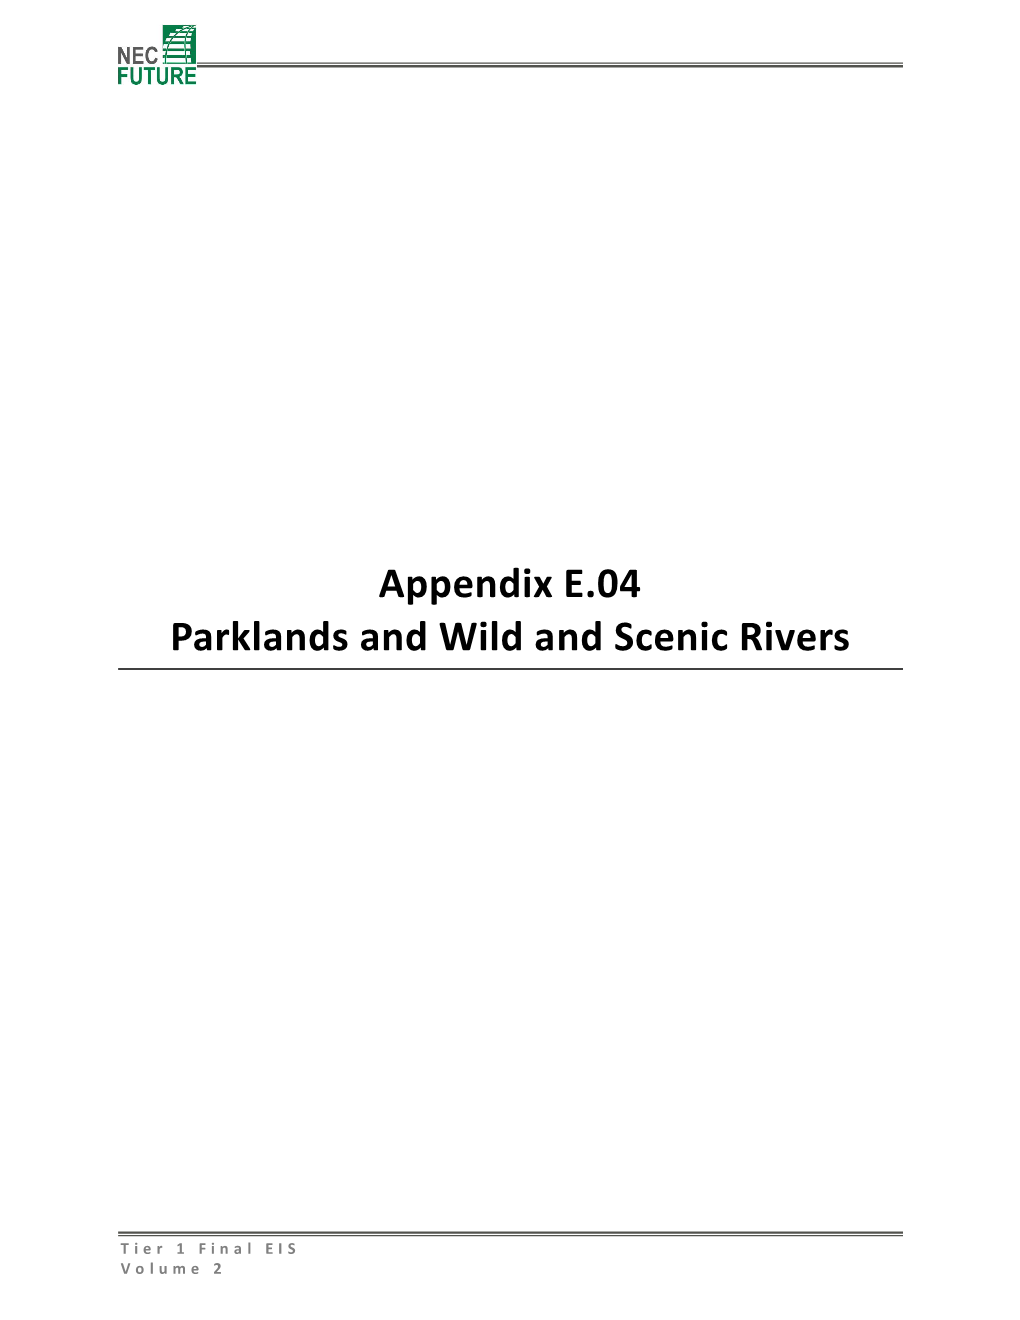 Appendix E.04 Parklands and Wild and Scenic Rivers